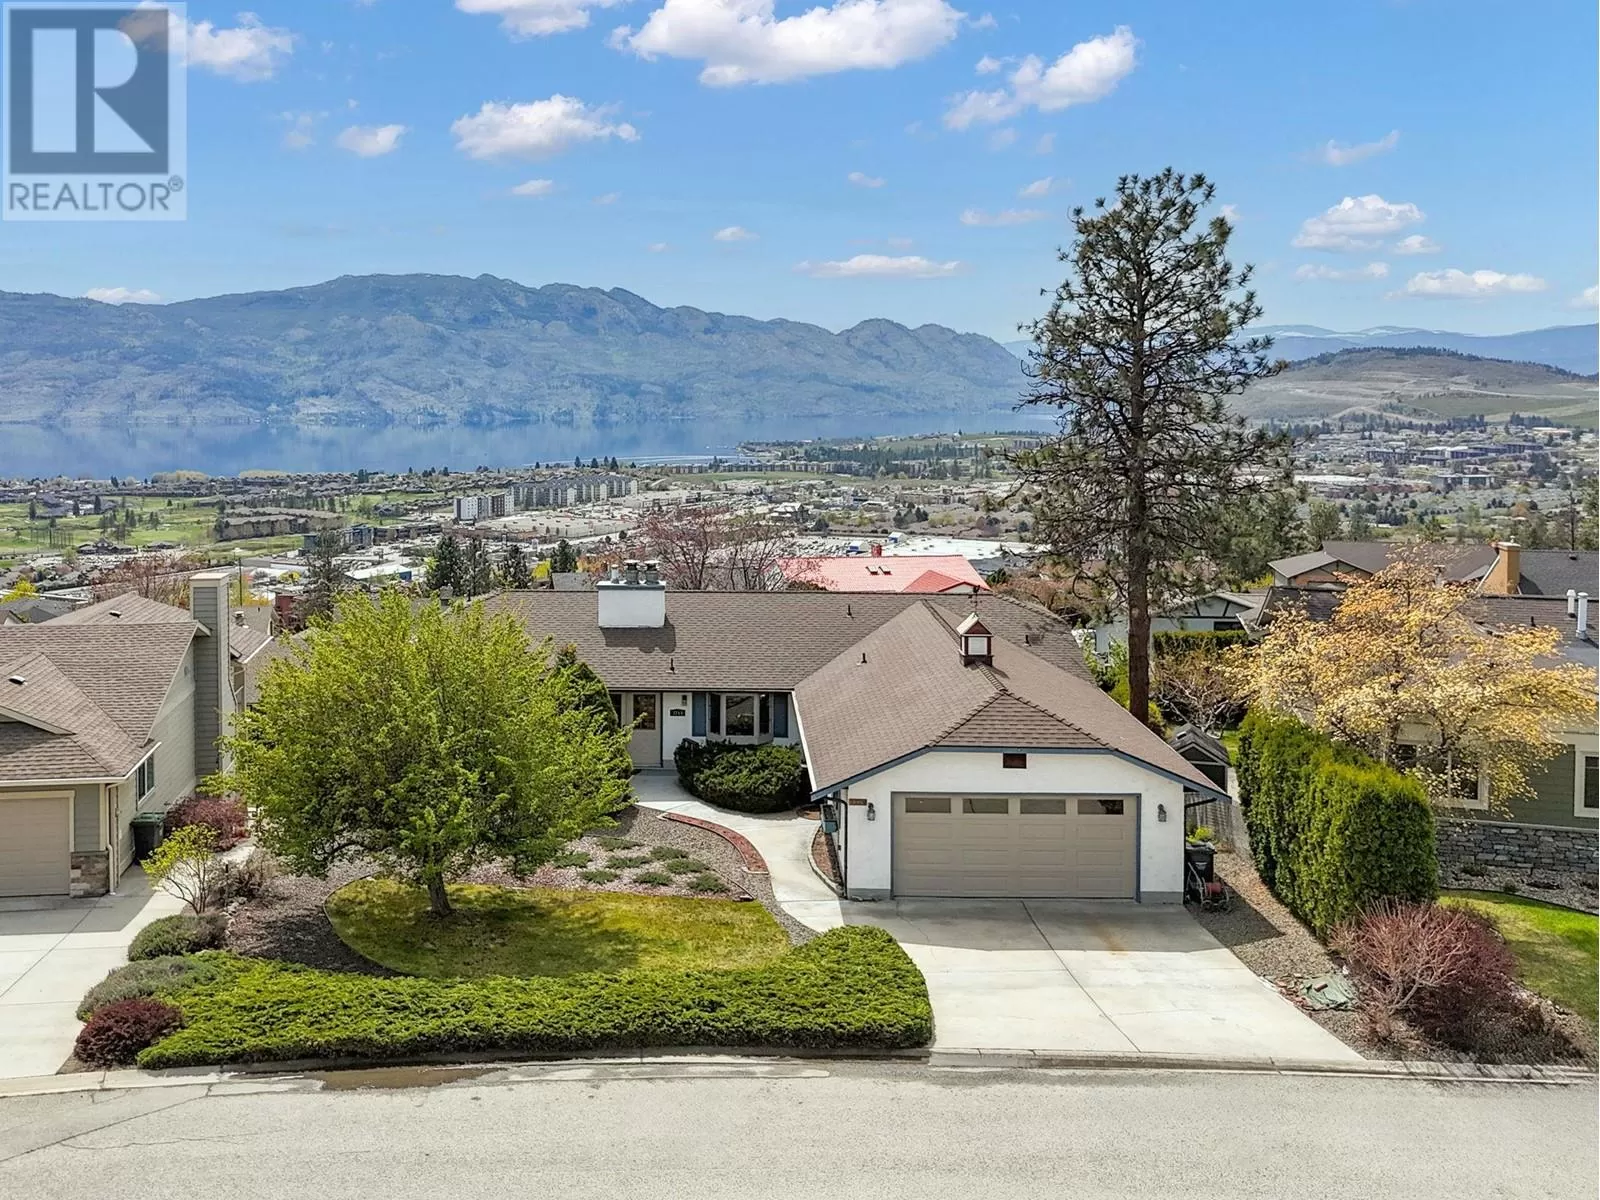 House for rent: 3219 Sunset Place, West Kelowna, British Columbia V4T 1S3